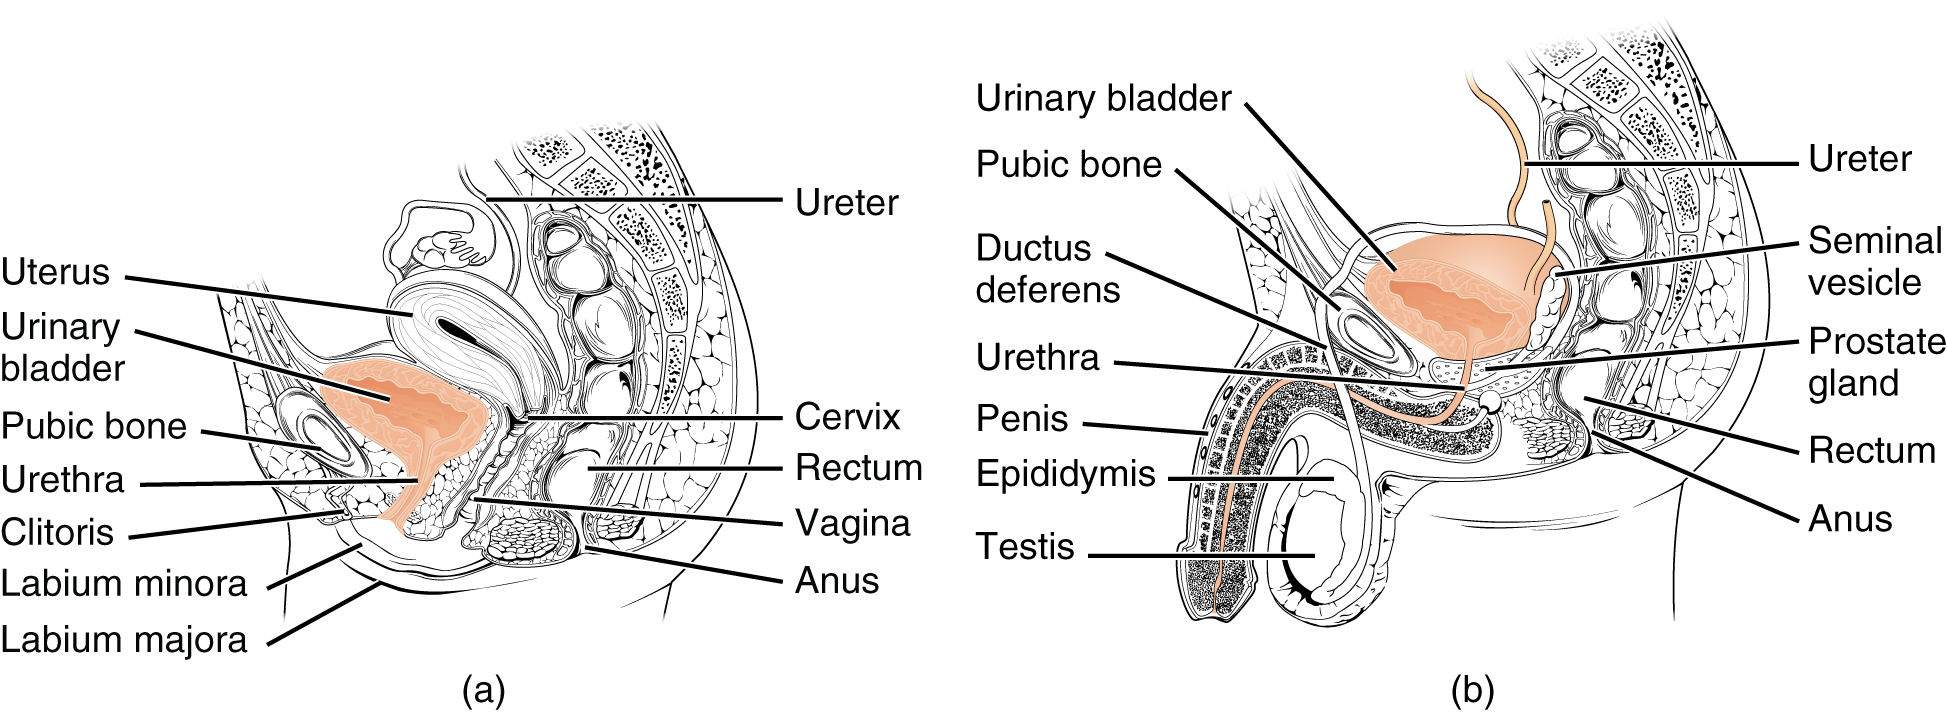 Two drawings of midsagittal views of lower urinary tract of female in A and male in B.